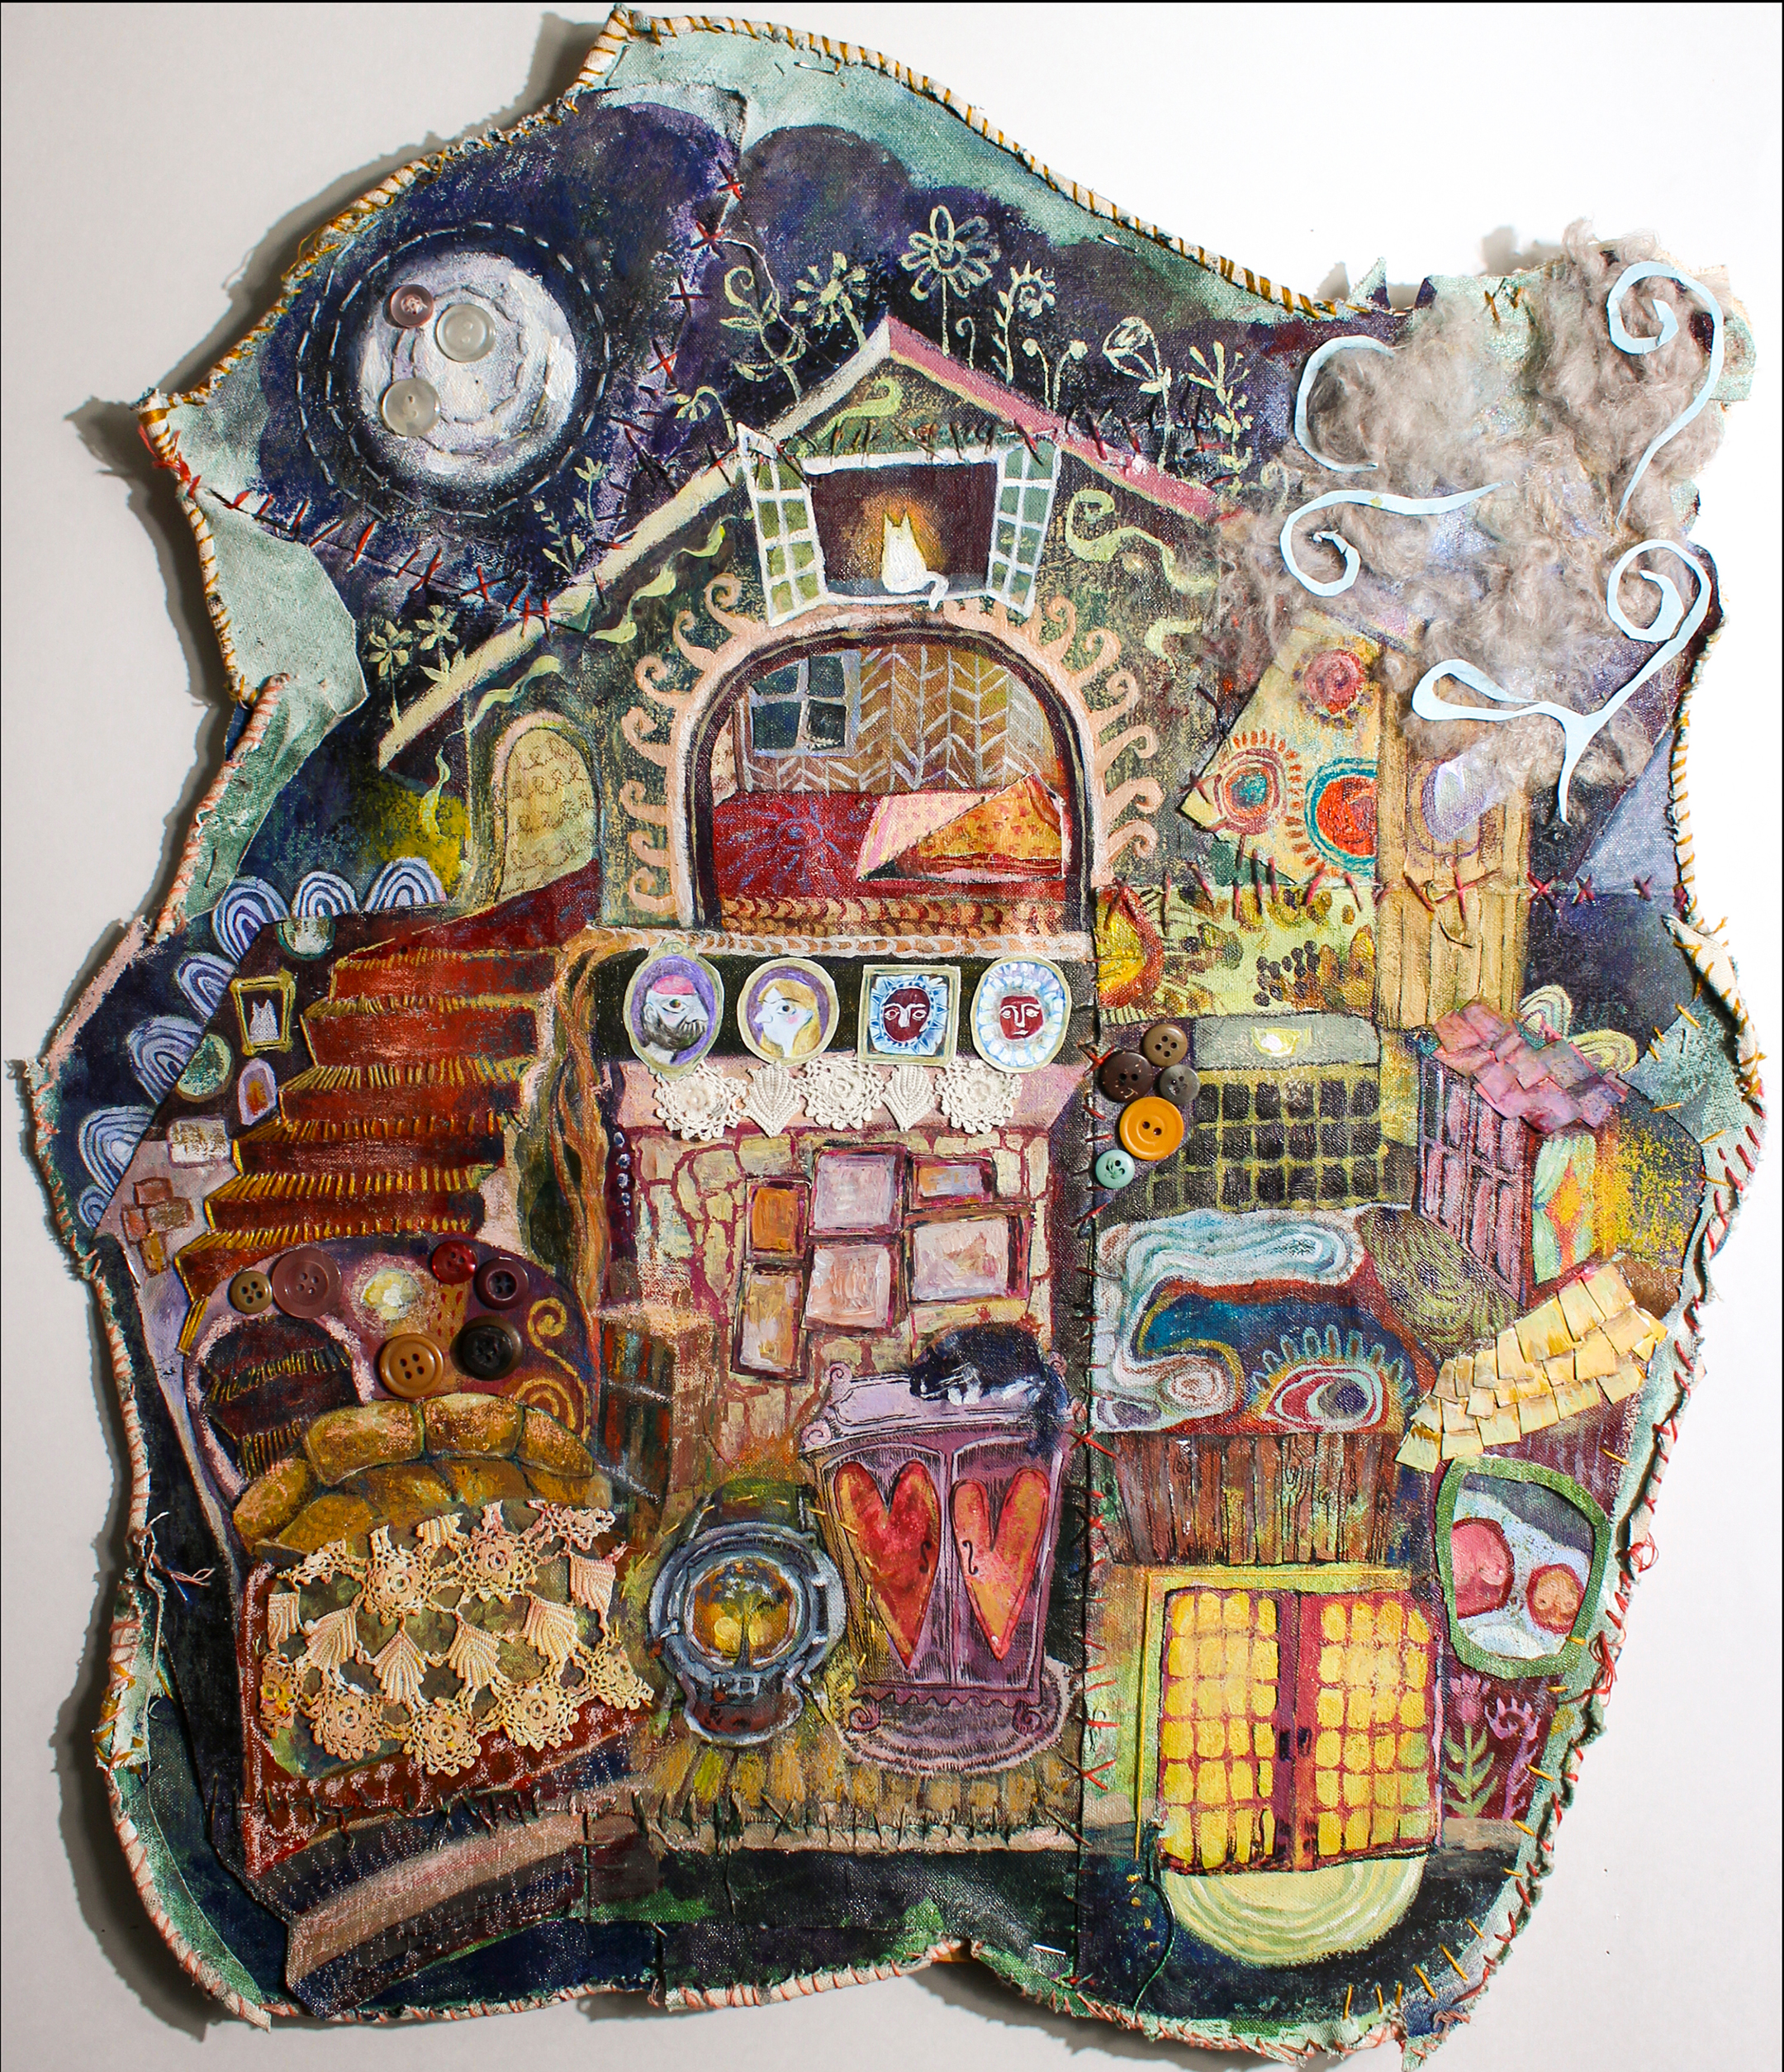 Photograph of a mixed-media collage in an abstract shape